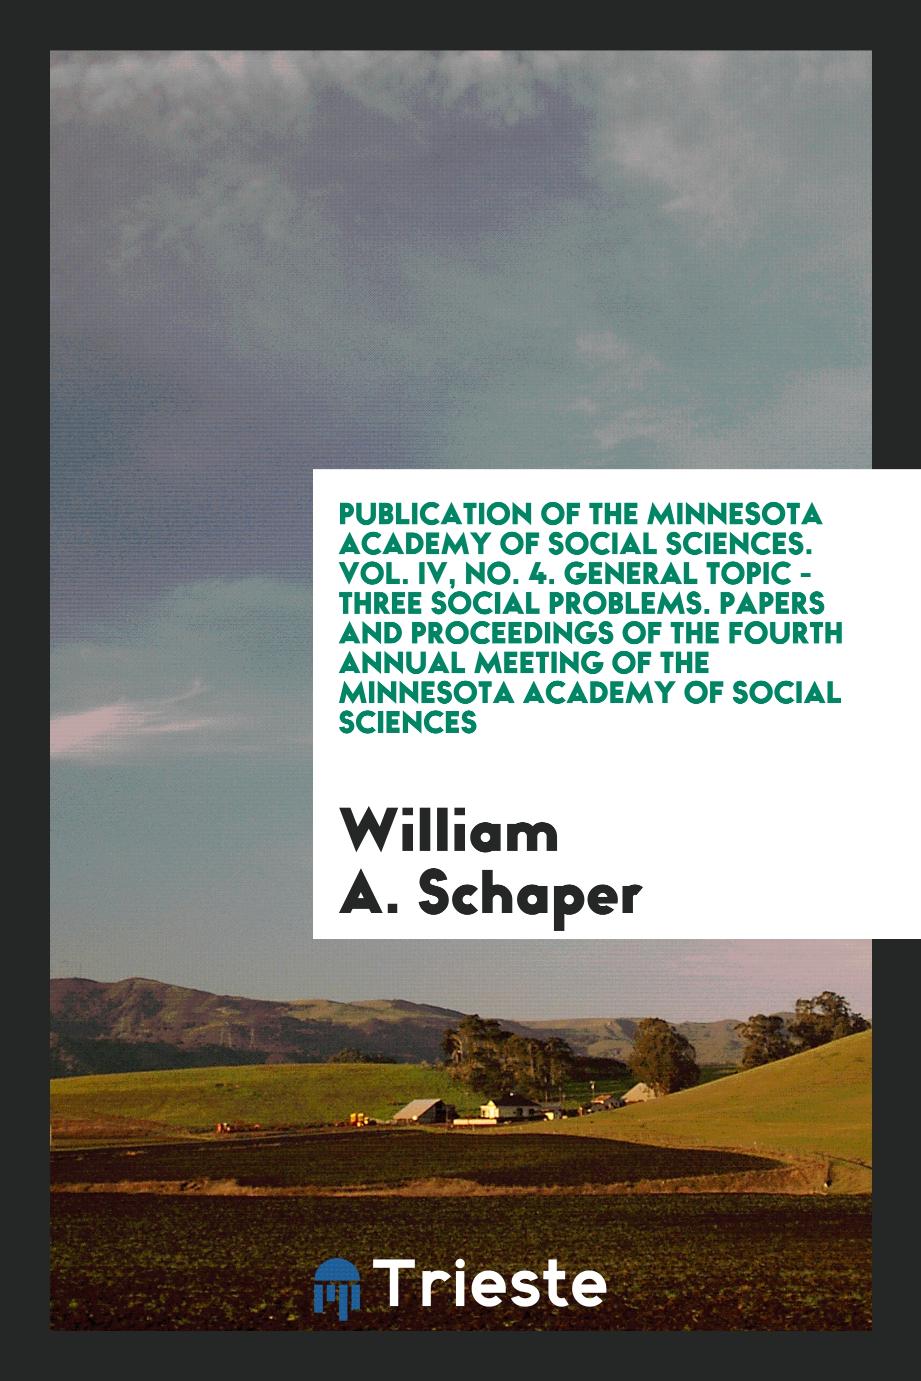 Publication of the Minnesota Academy of Social Sciences. Vol. IV, No. 4. General Topic - Three Social Problems. Papers and Proceedings of the Fourth Annual Meeting of the Minnesota Academy of Social Sciences